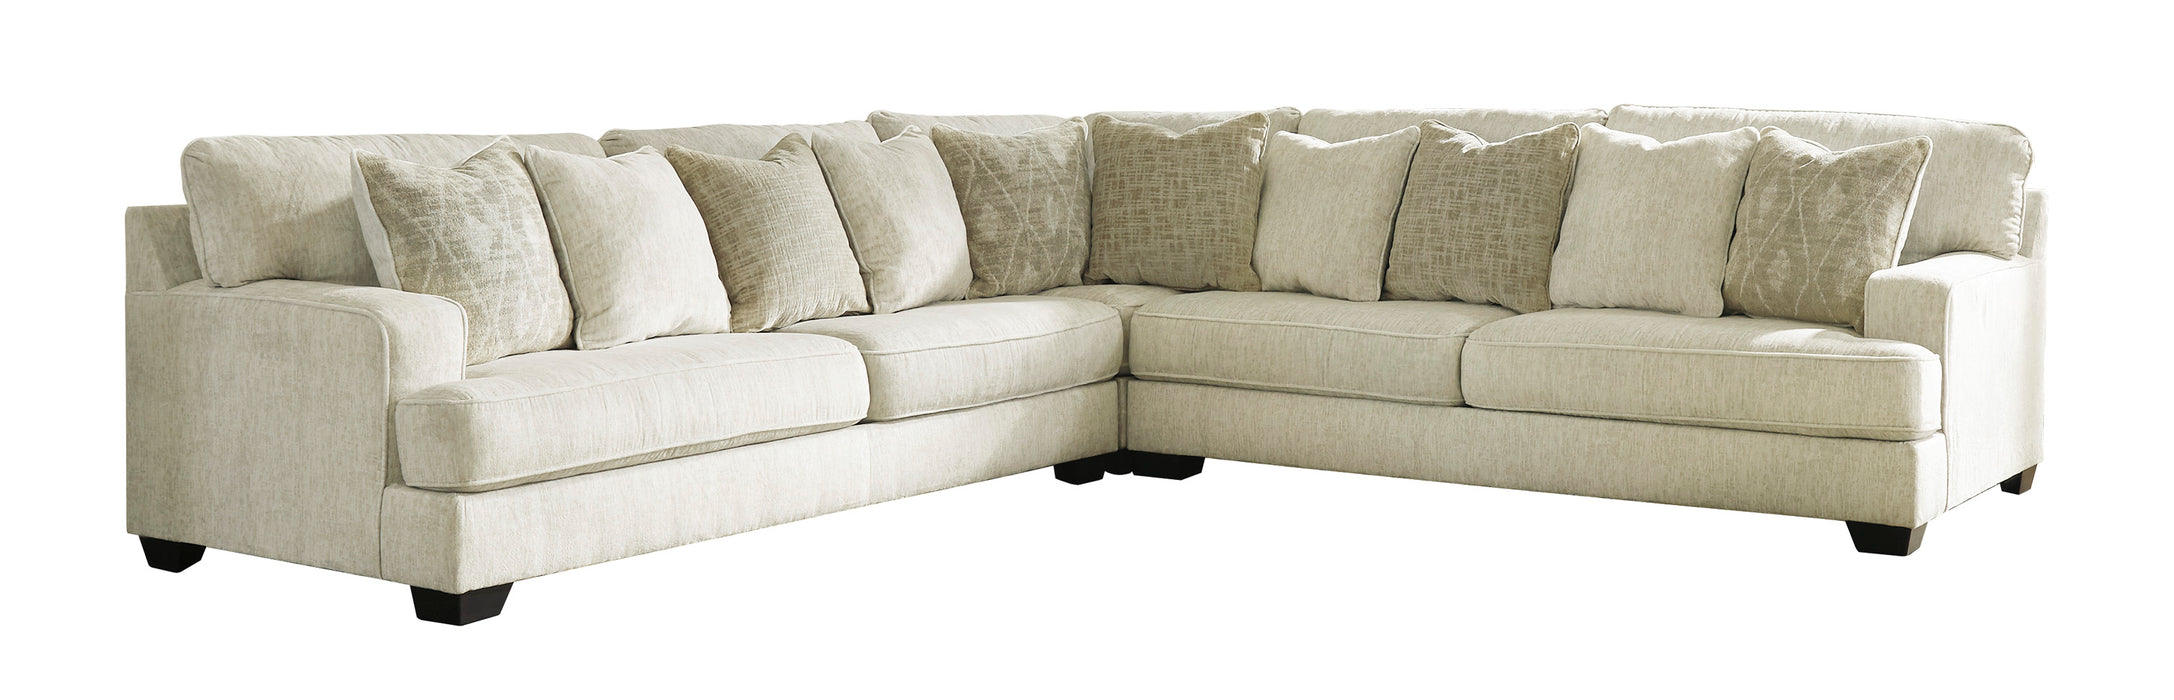 Rawcliffe Sectional (3-Piece or 4-Piece)